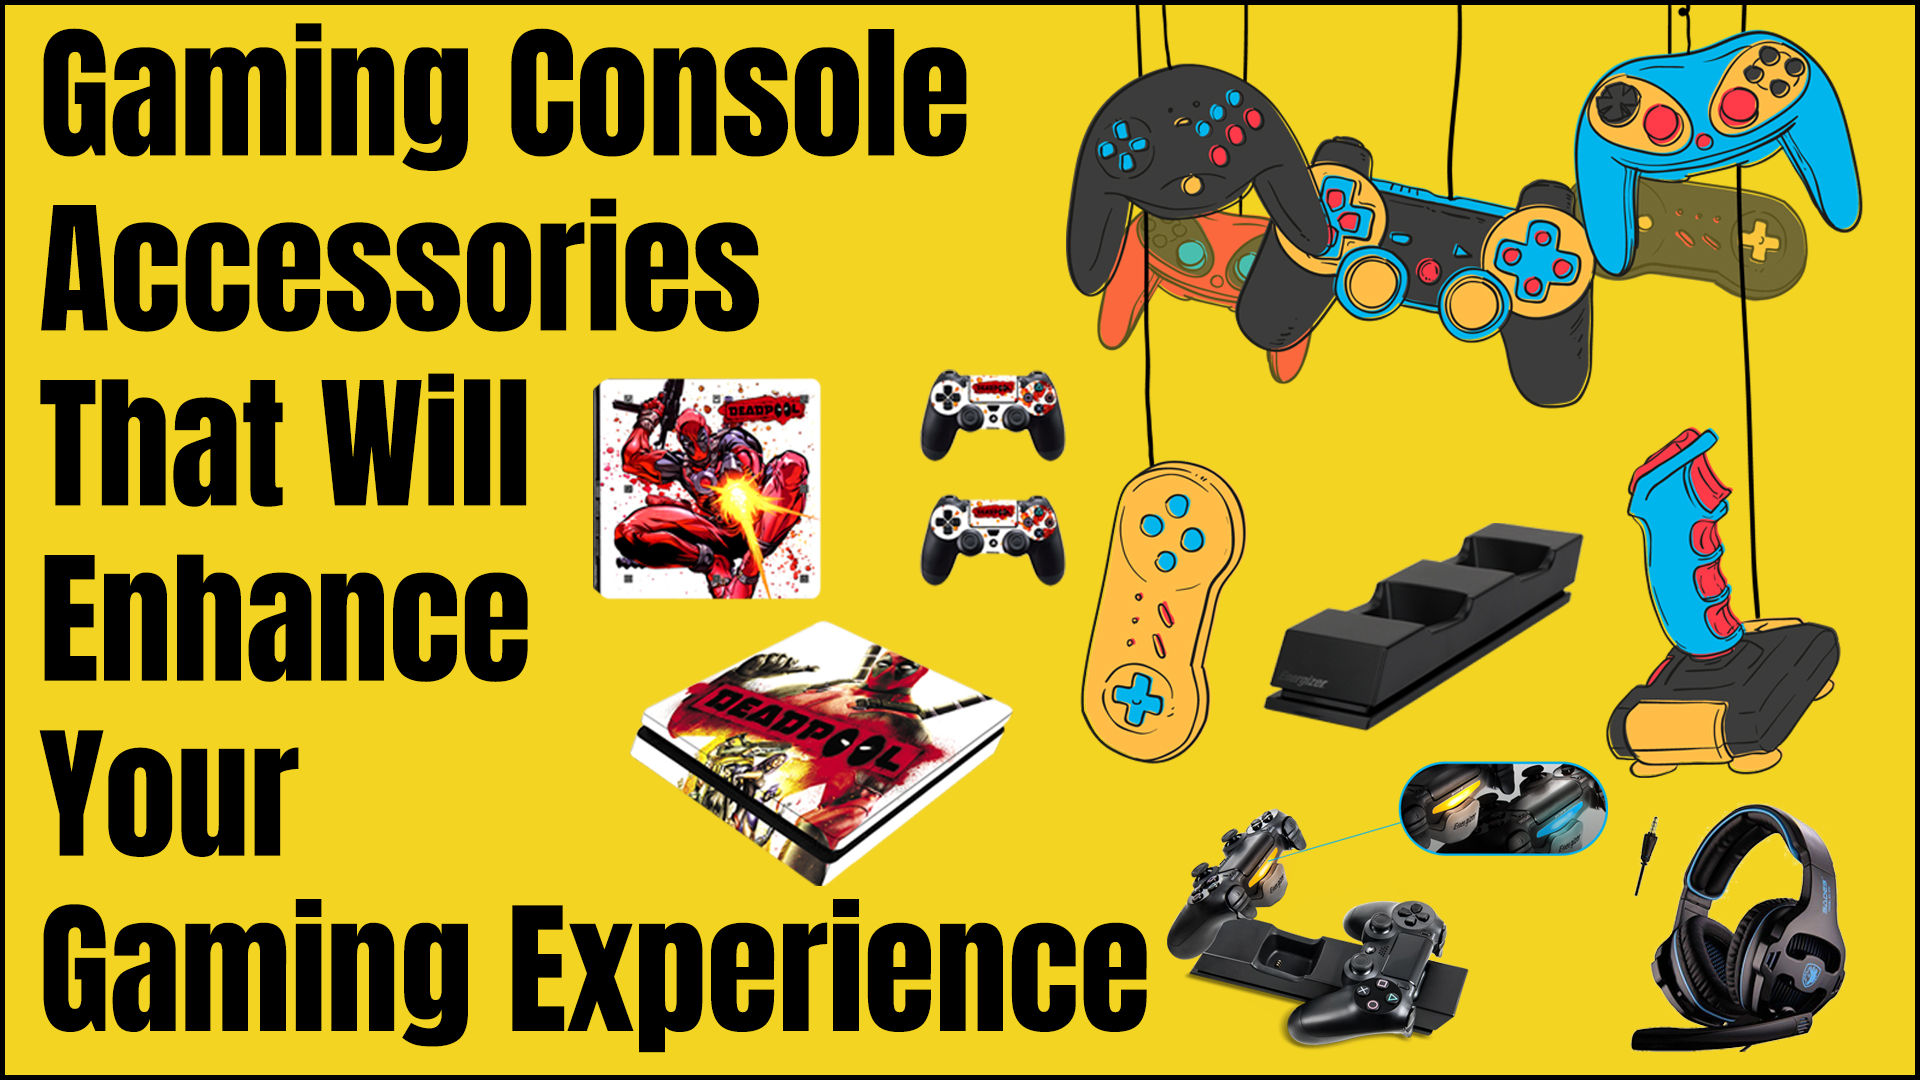 Gaming Console Accessories That Will Enhance Your Gaming Experience